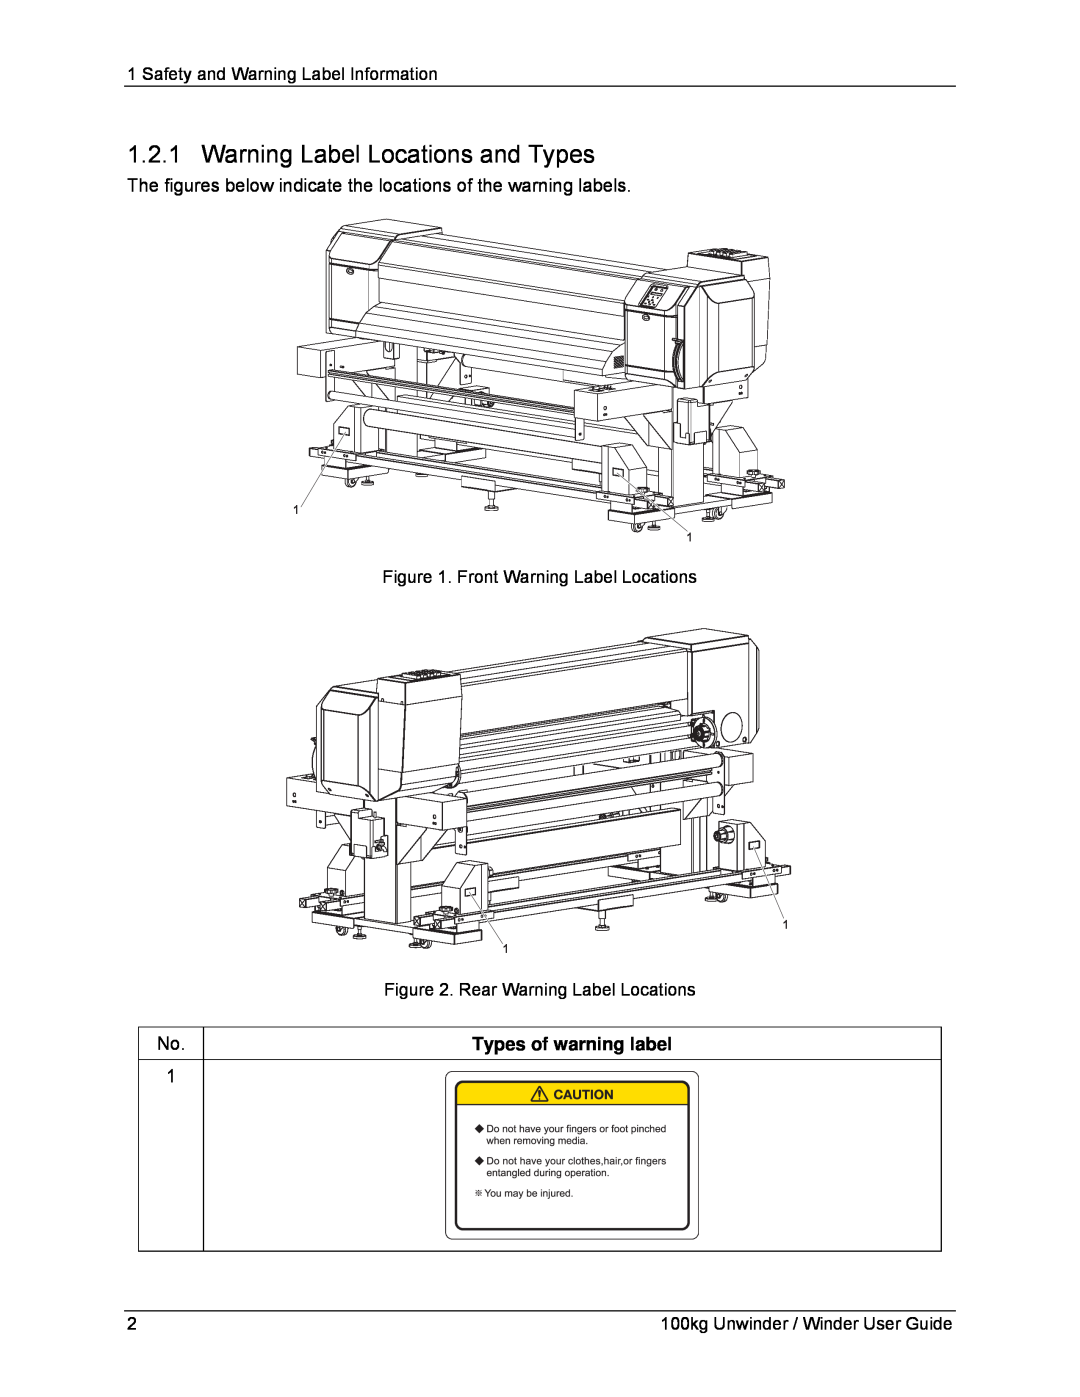 Xerox 8264E, 8254E Warning Label Locations and Types, Safety and Warning Label Information, Front Warning Label Locations 